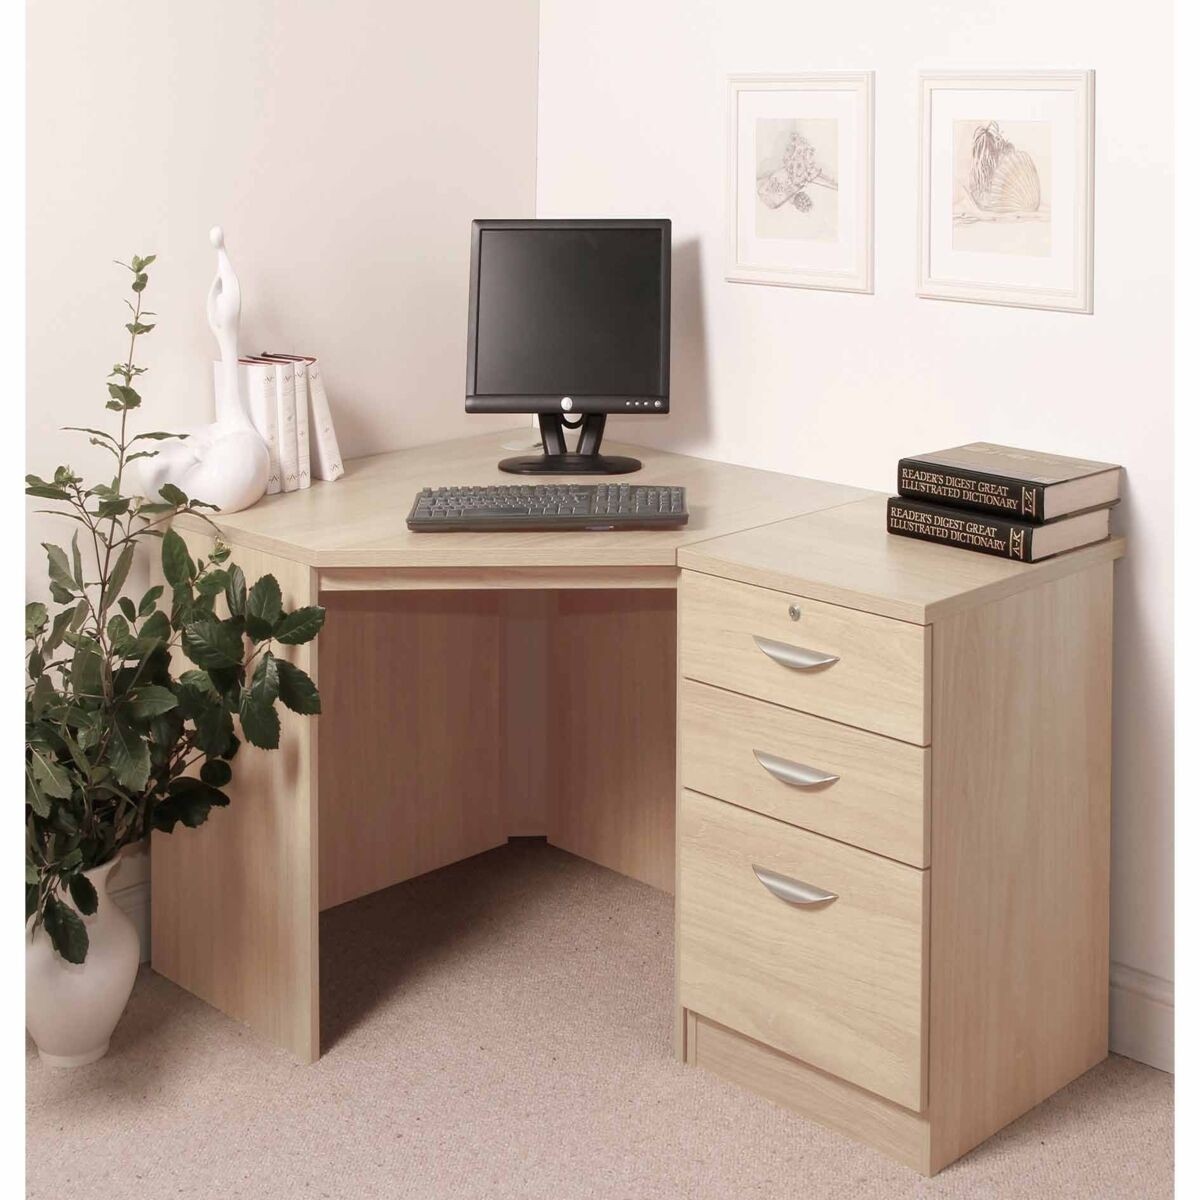 R white home office corner desk with three drawers 1